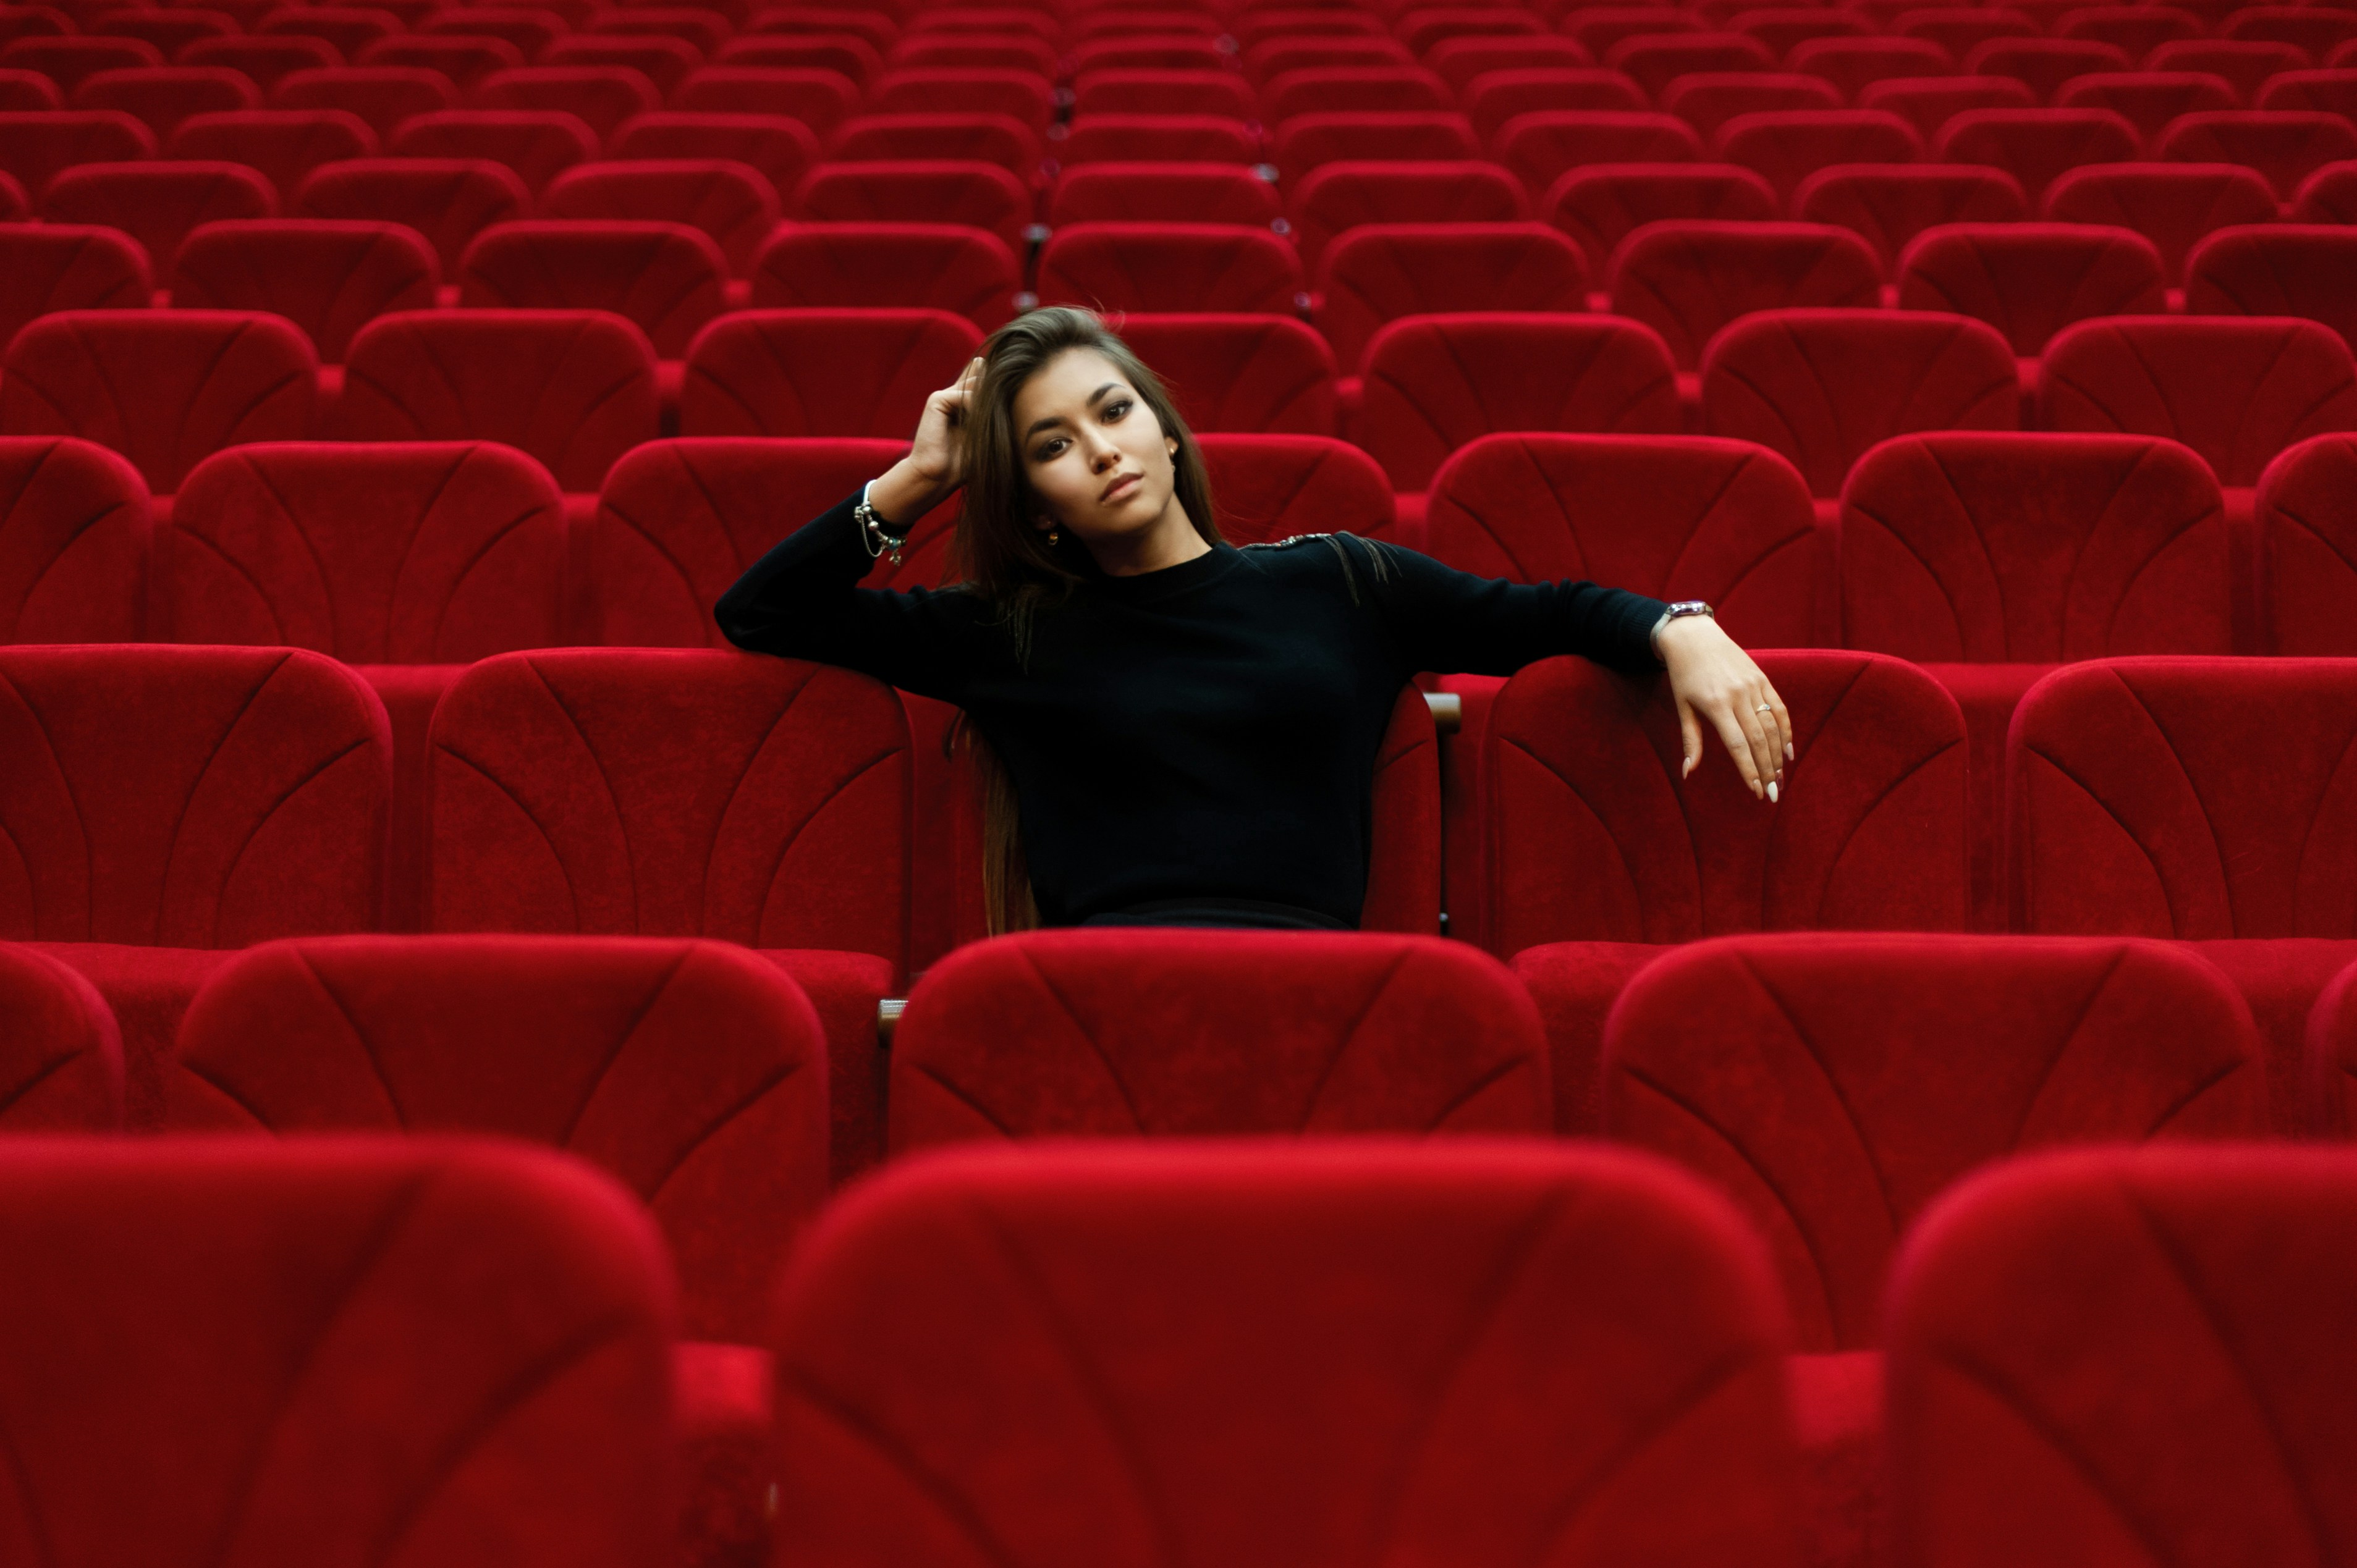 great photo recipe,how to photograph karina. ; woman in black long sleeve shirt sitting on red chair